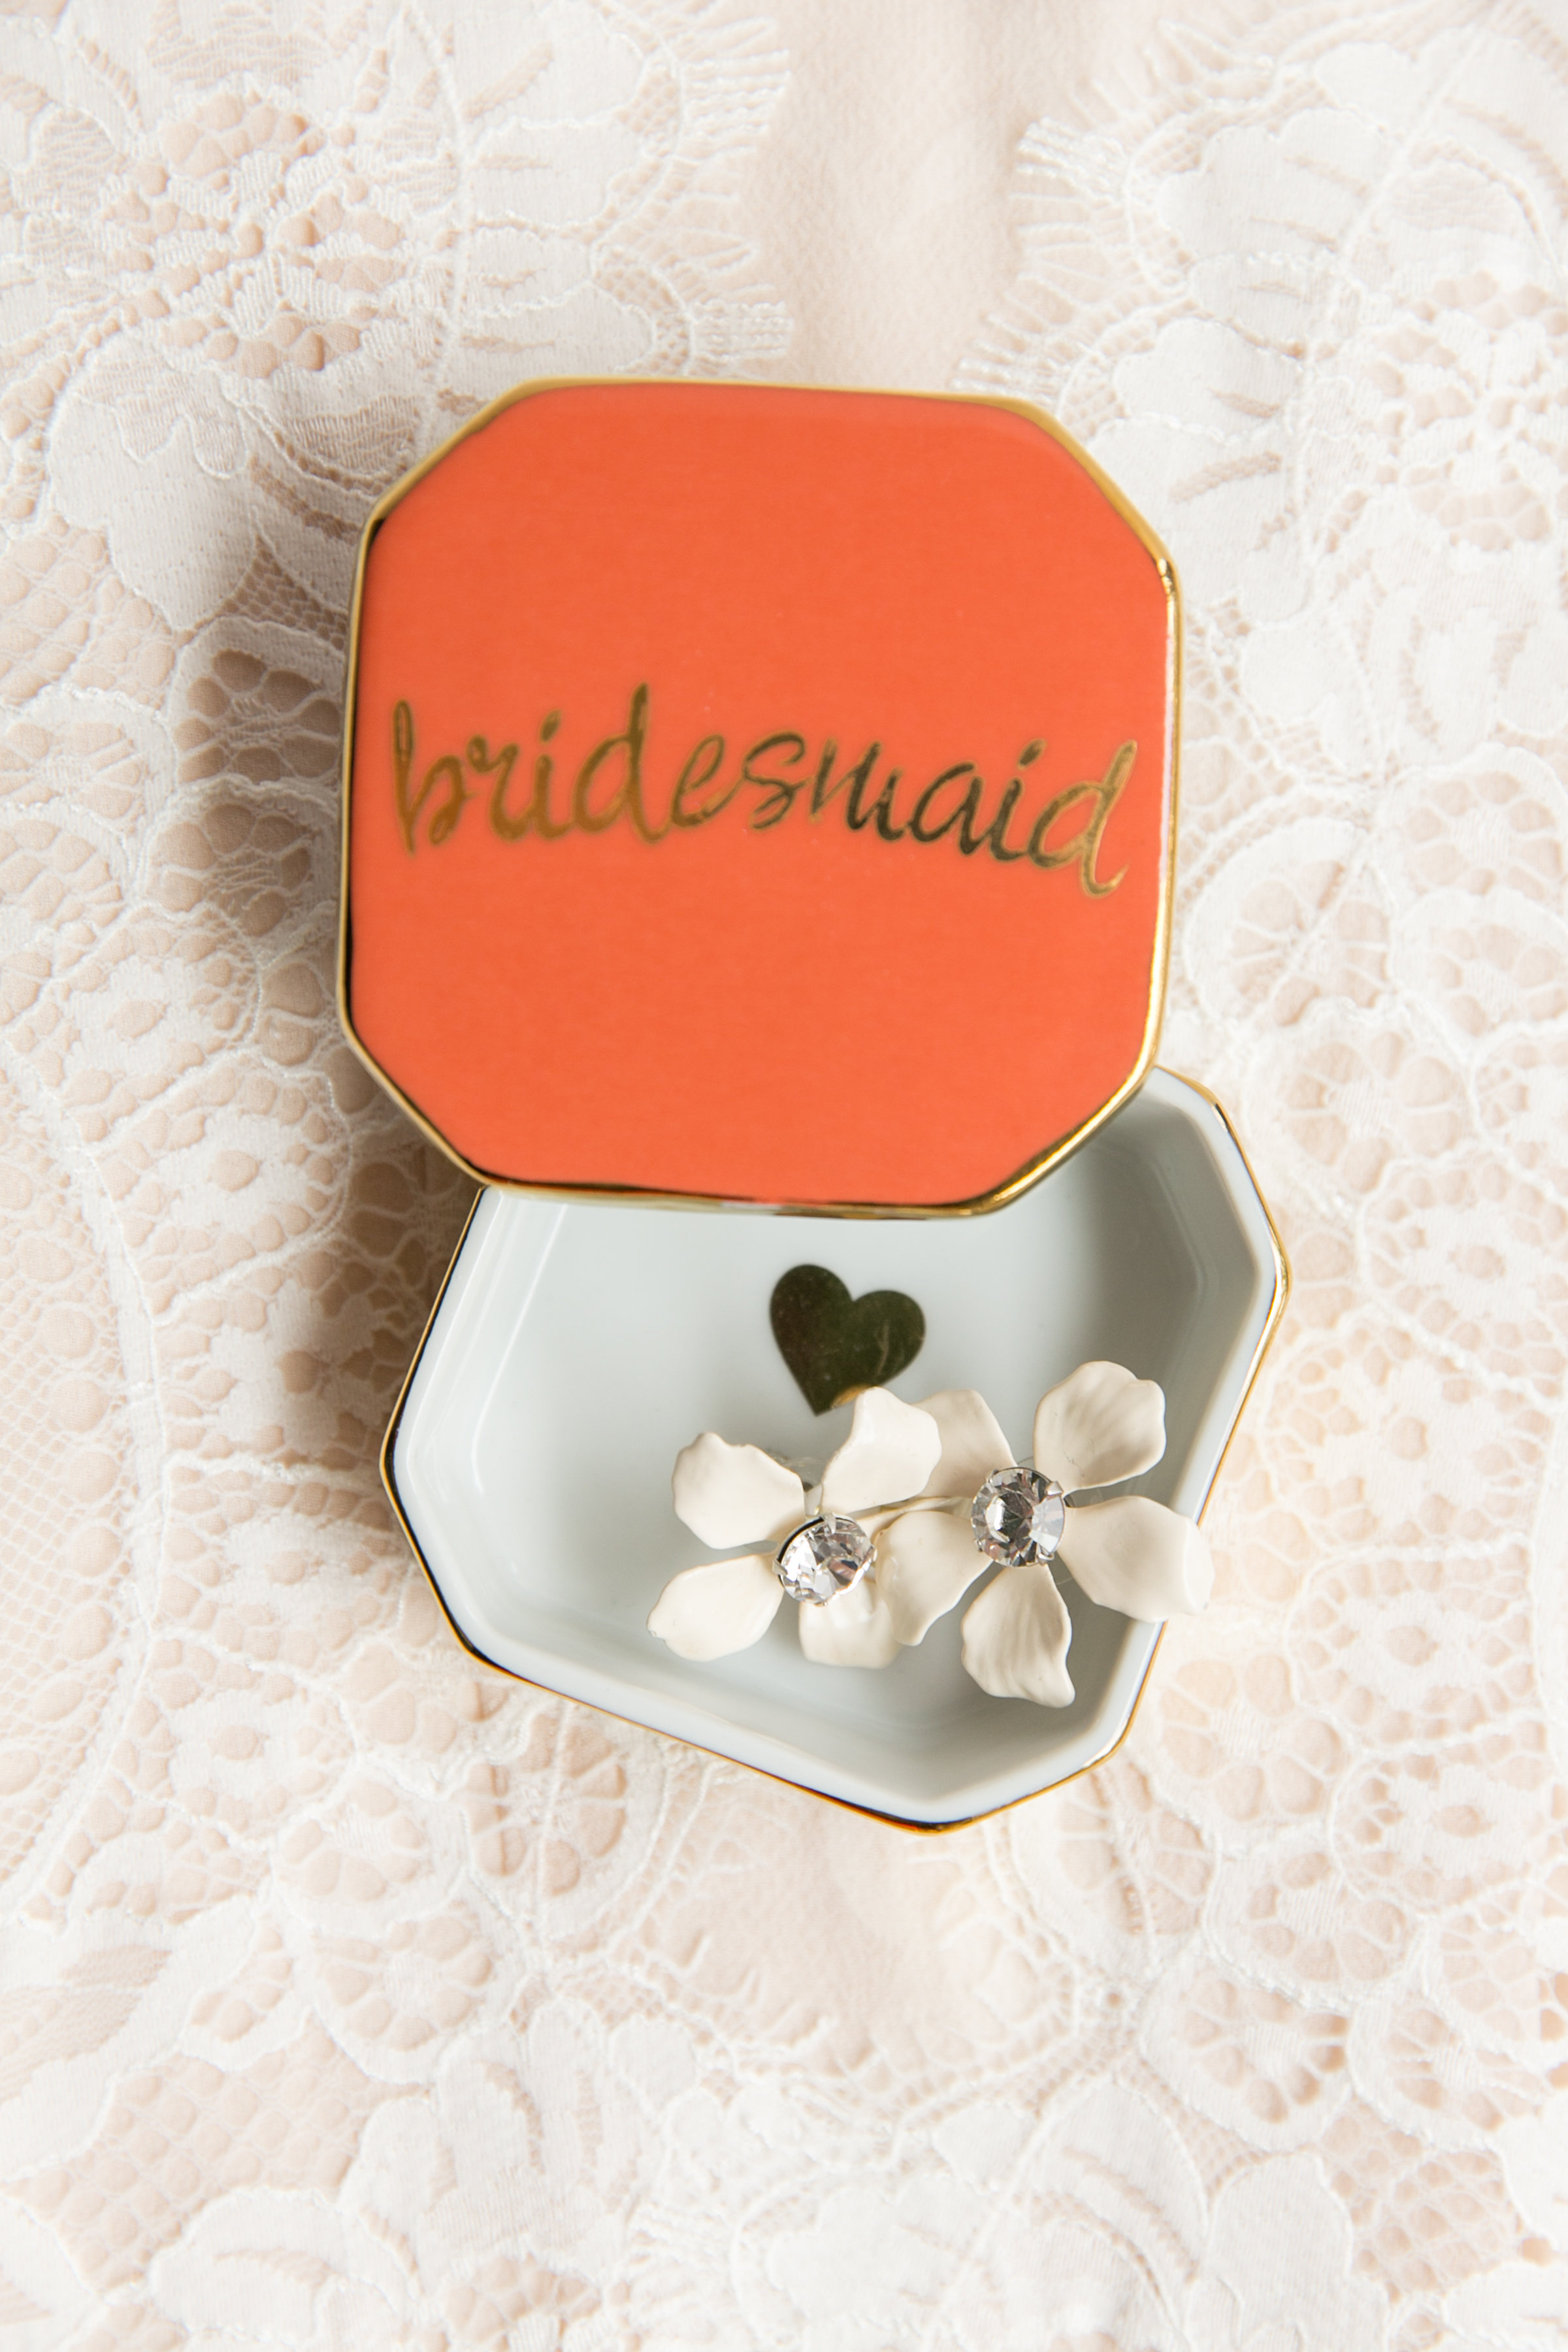 How To Find The Perfect Bridal Party Gifts via TheELD.com